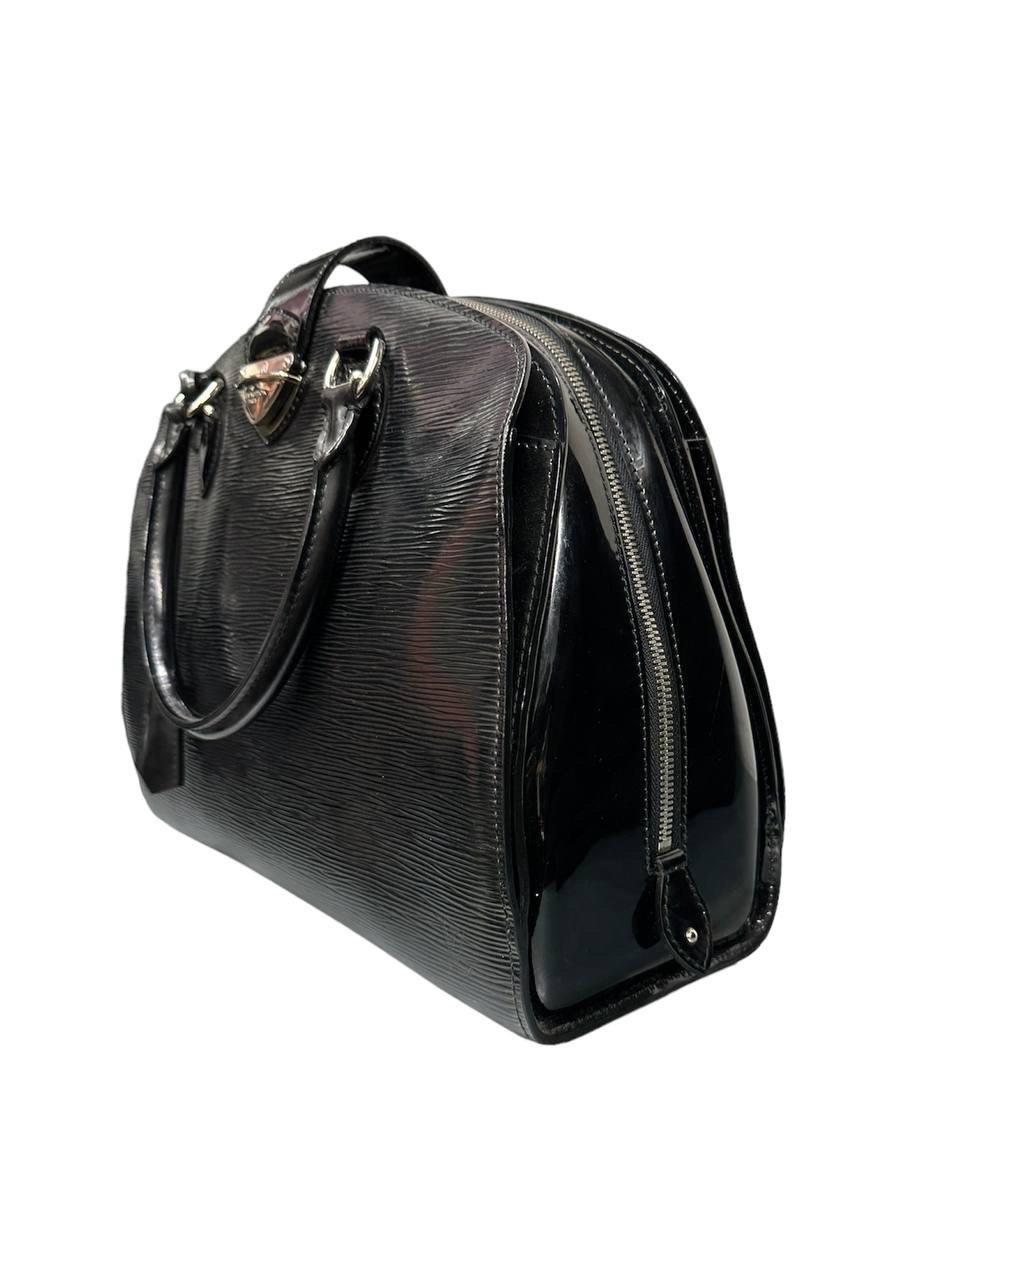 Louis Vuitton signed bag, Montaigne model, made of epi canvas in black patent leather and silver hardware. Equipped with double leather handle to wear the handbag. Internally lined in black alcantara, very roomy. Equipped with upper zip closure and